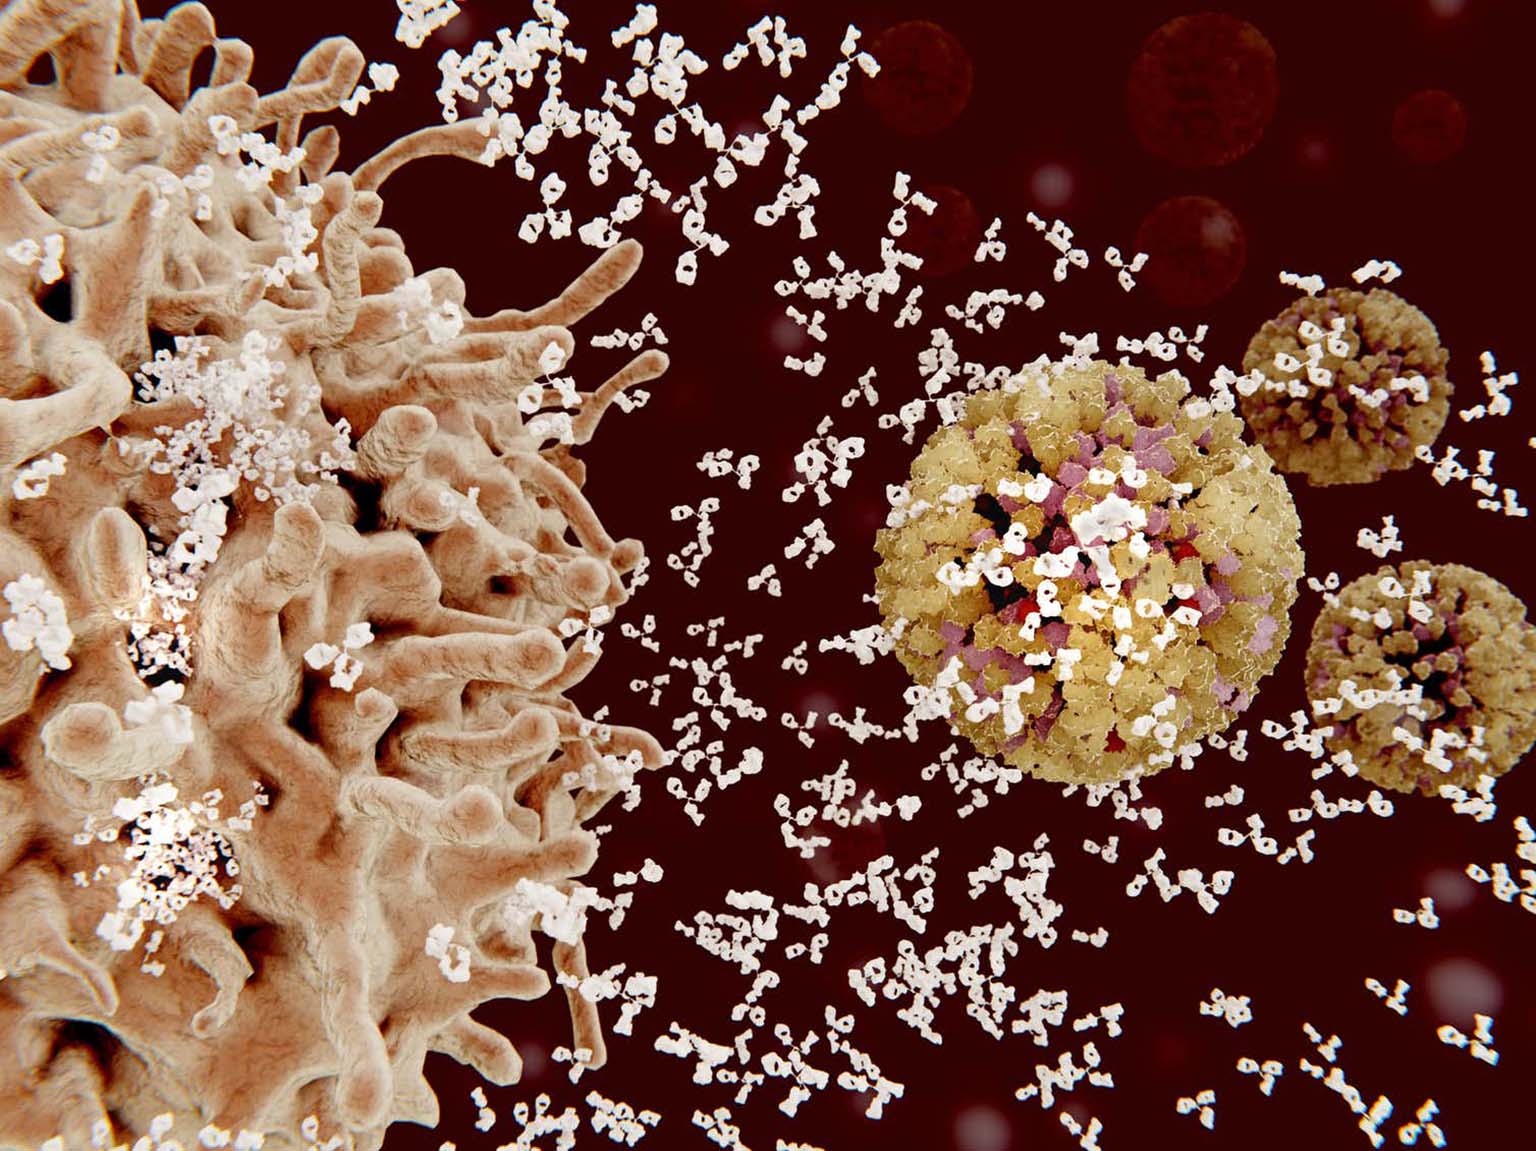 Computer illustration of an immune cell (left) releasing many antibodies (white) to attack and disable invading flu particles.